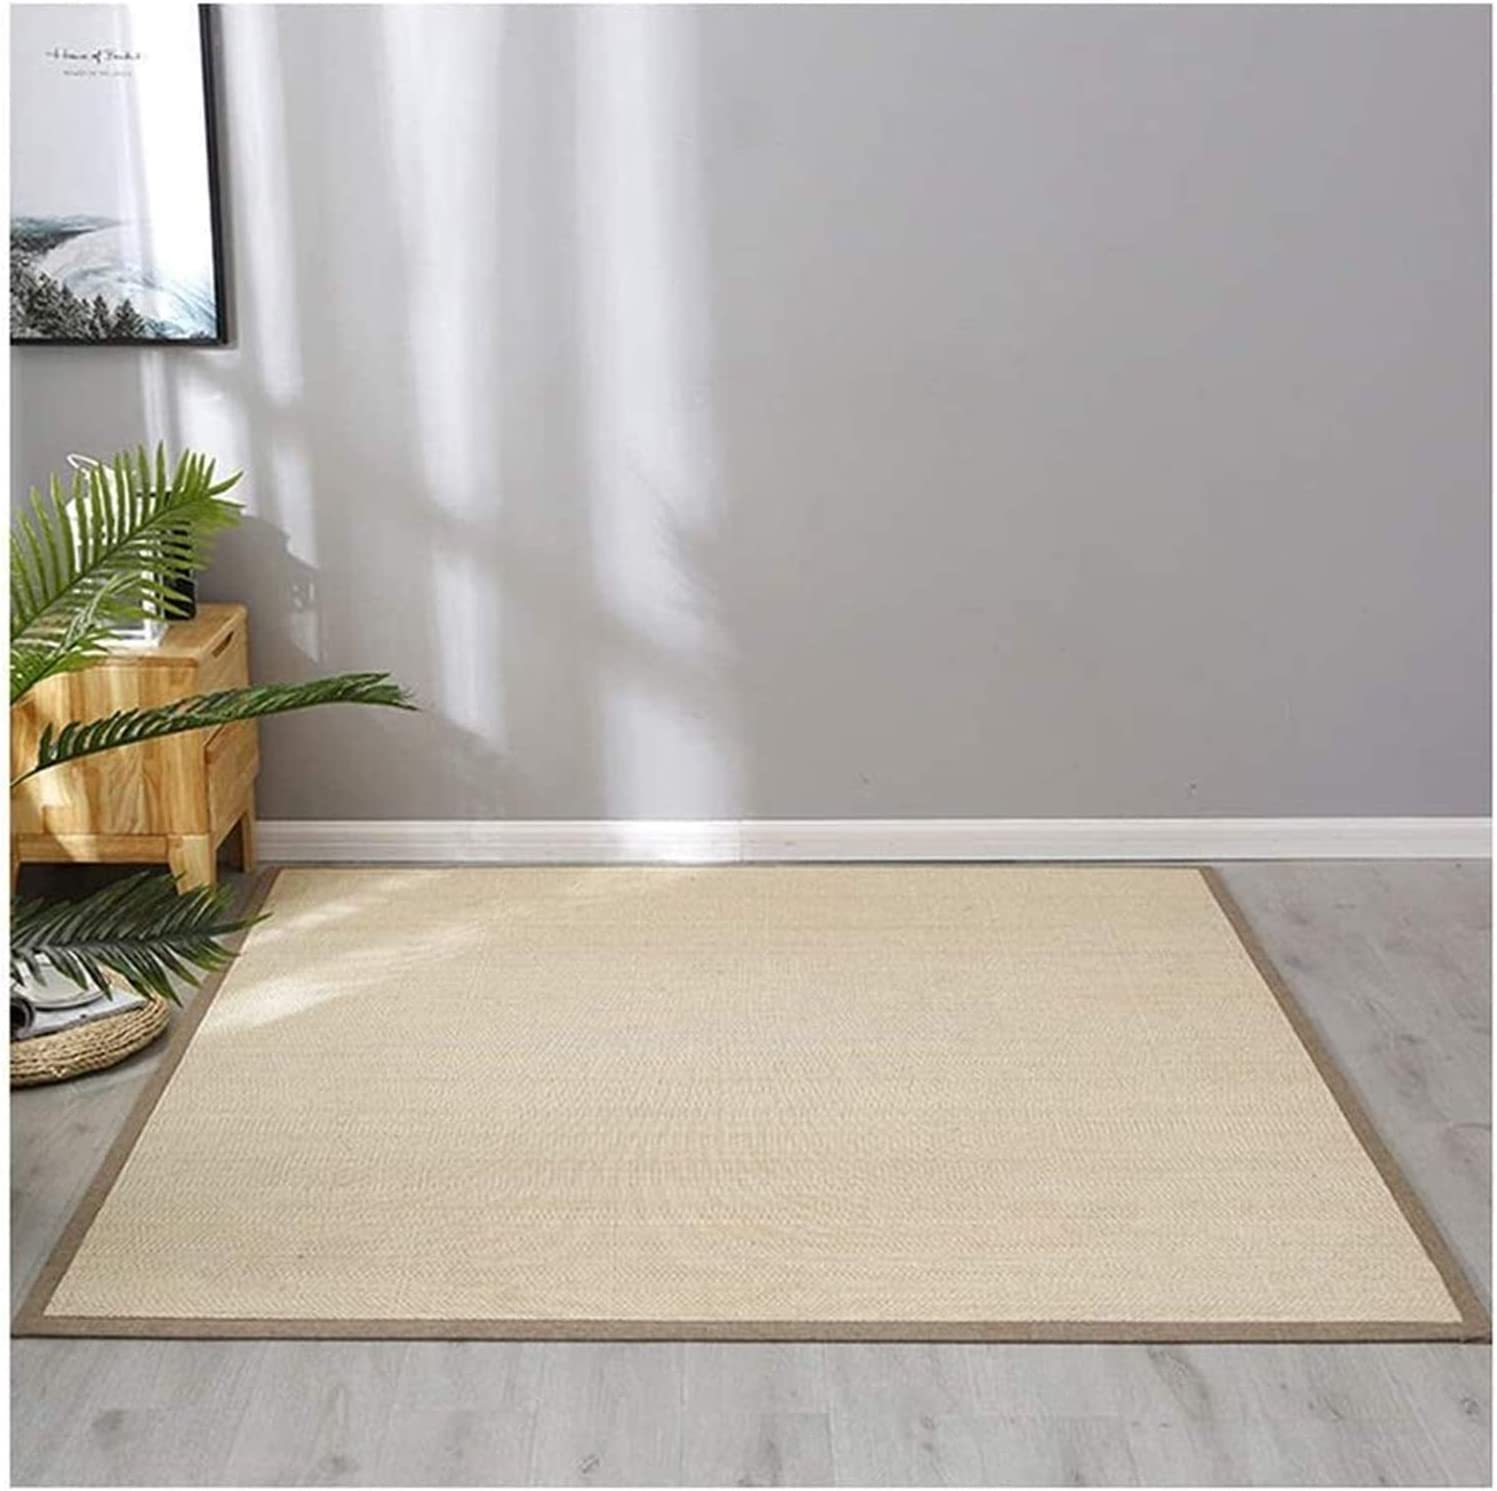 Which Rugs are Non-Toxic